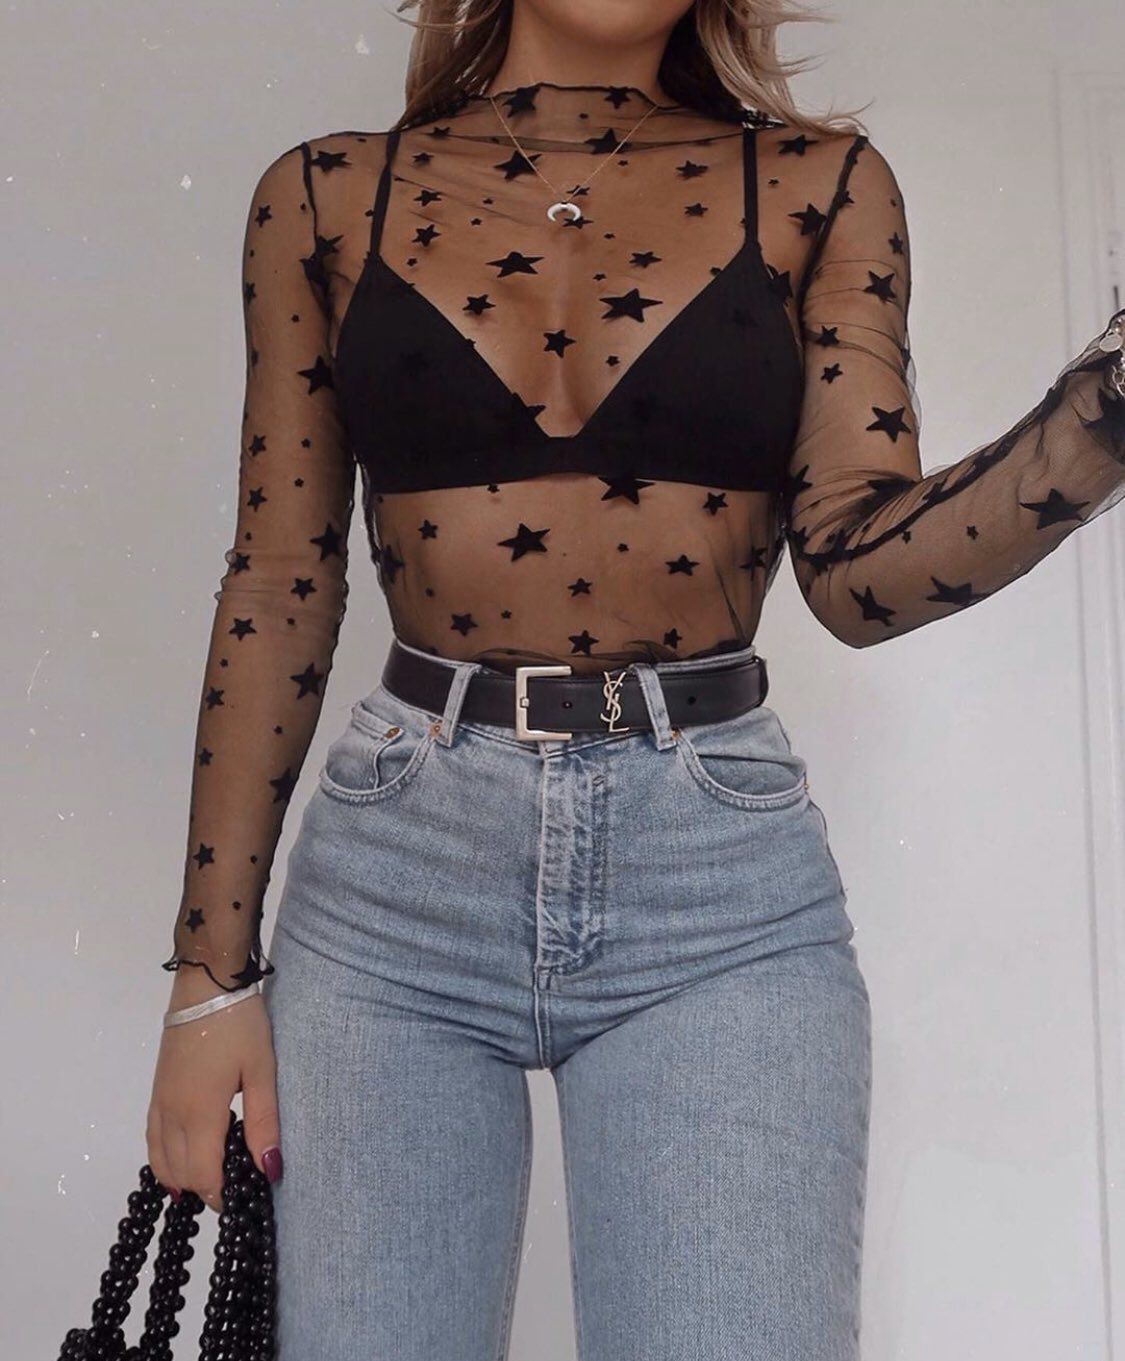 Outfit night out aesthetic, casual wear, crop top, t shirt | Mesh